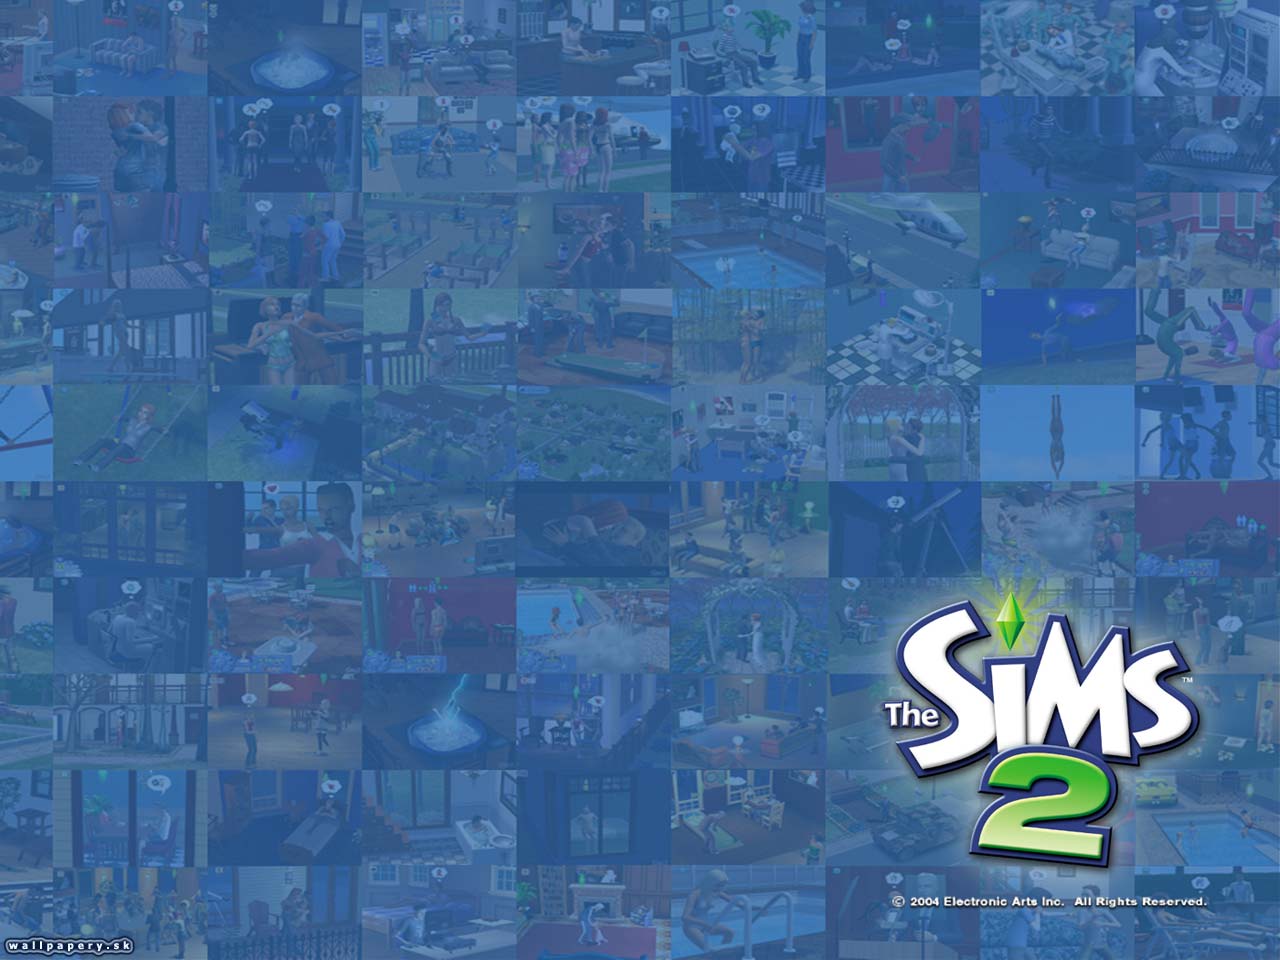 The Sims 2 - wallpaper 16